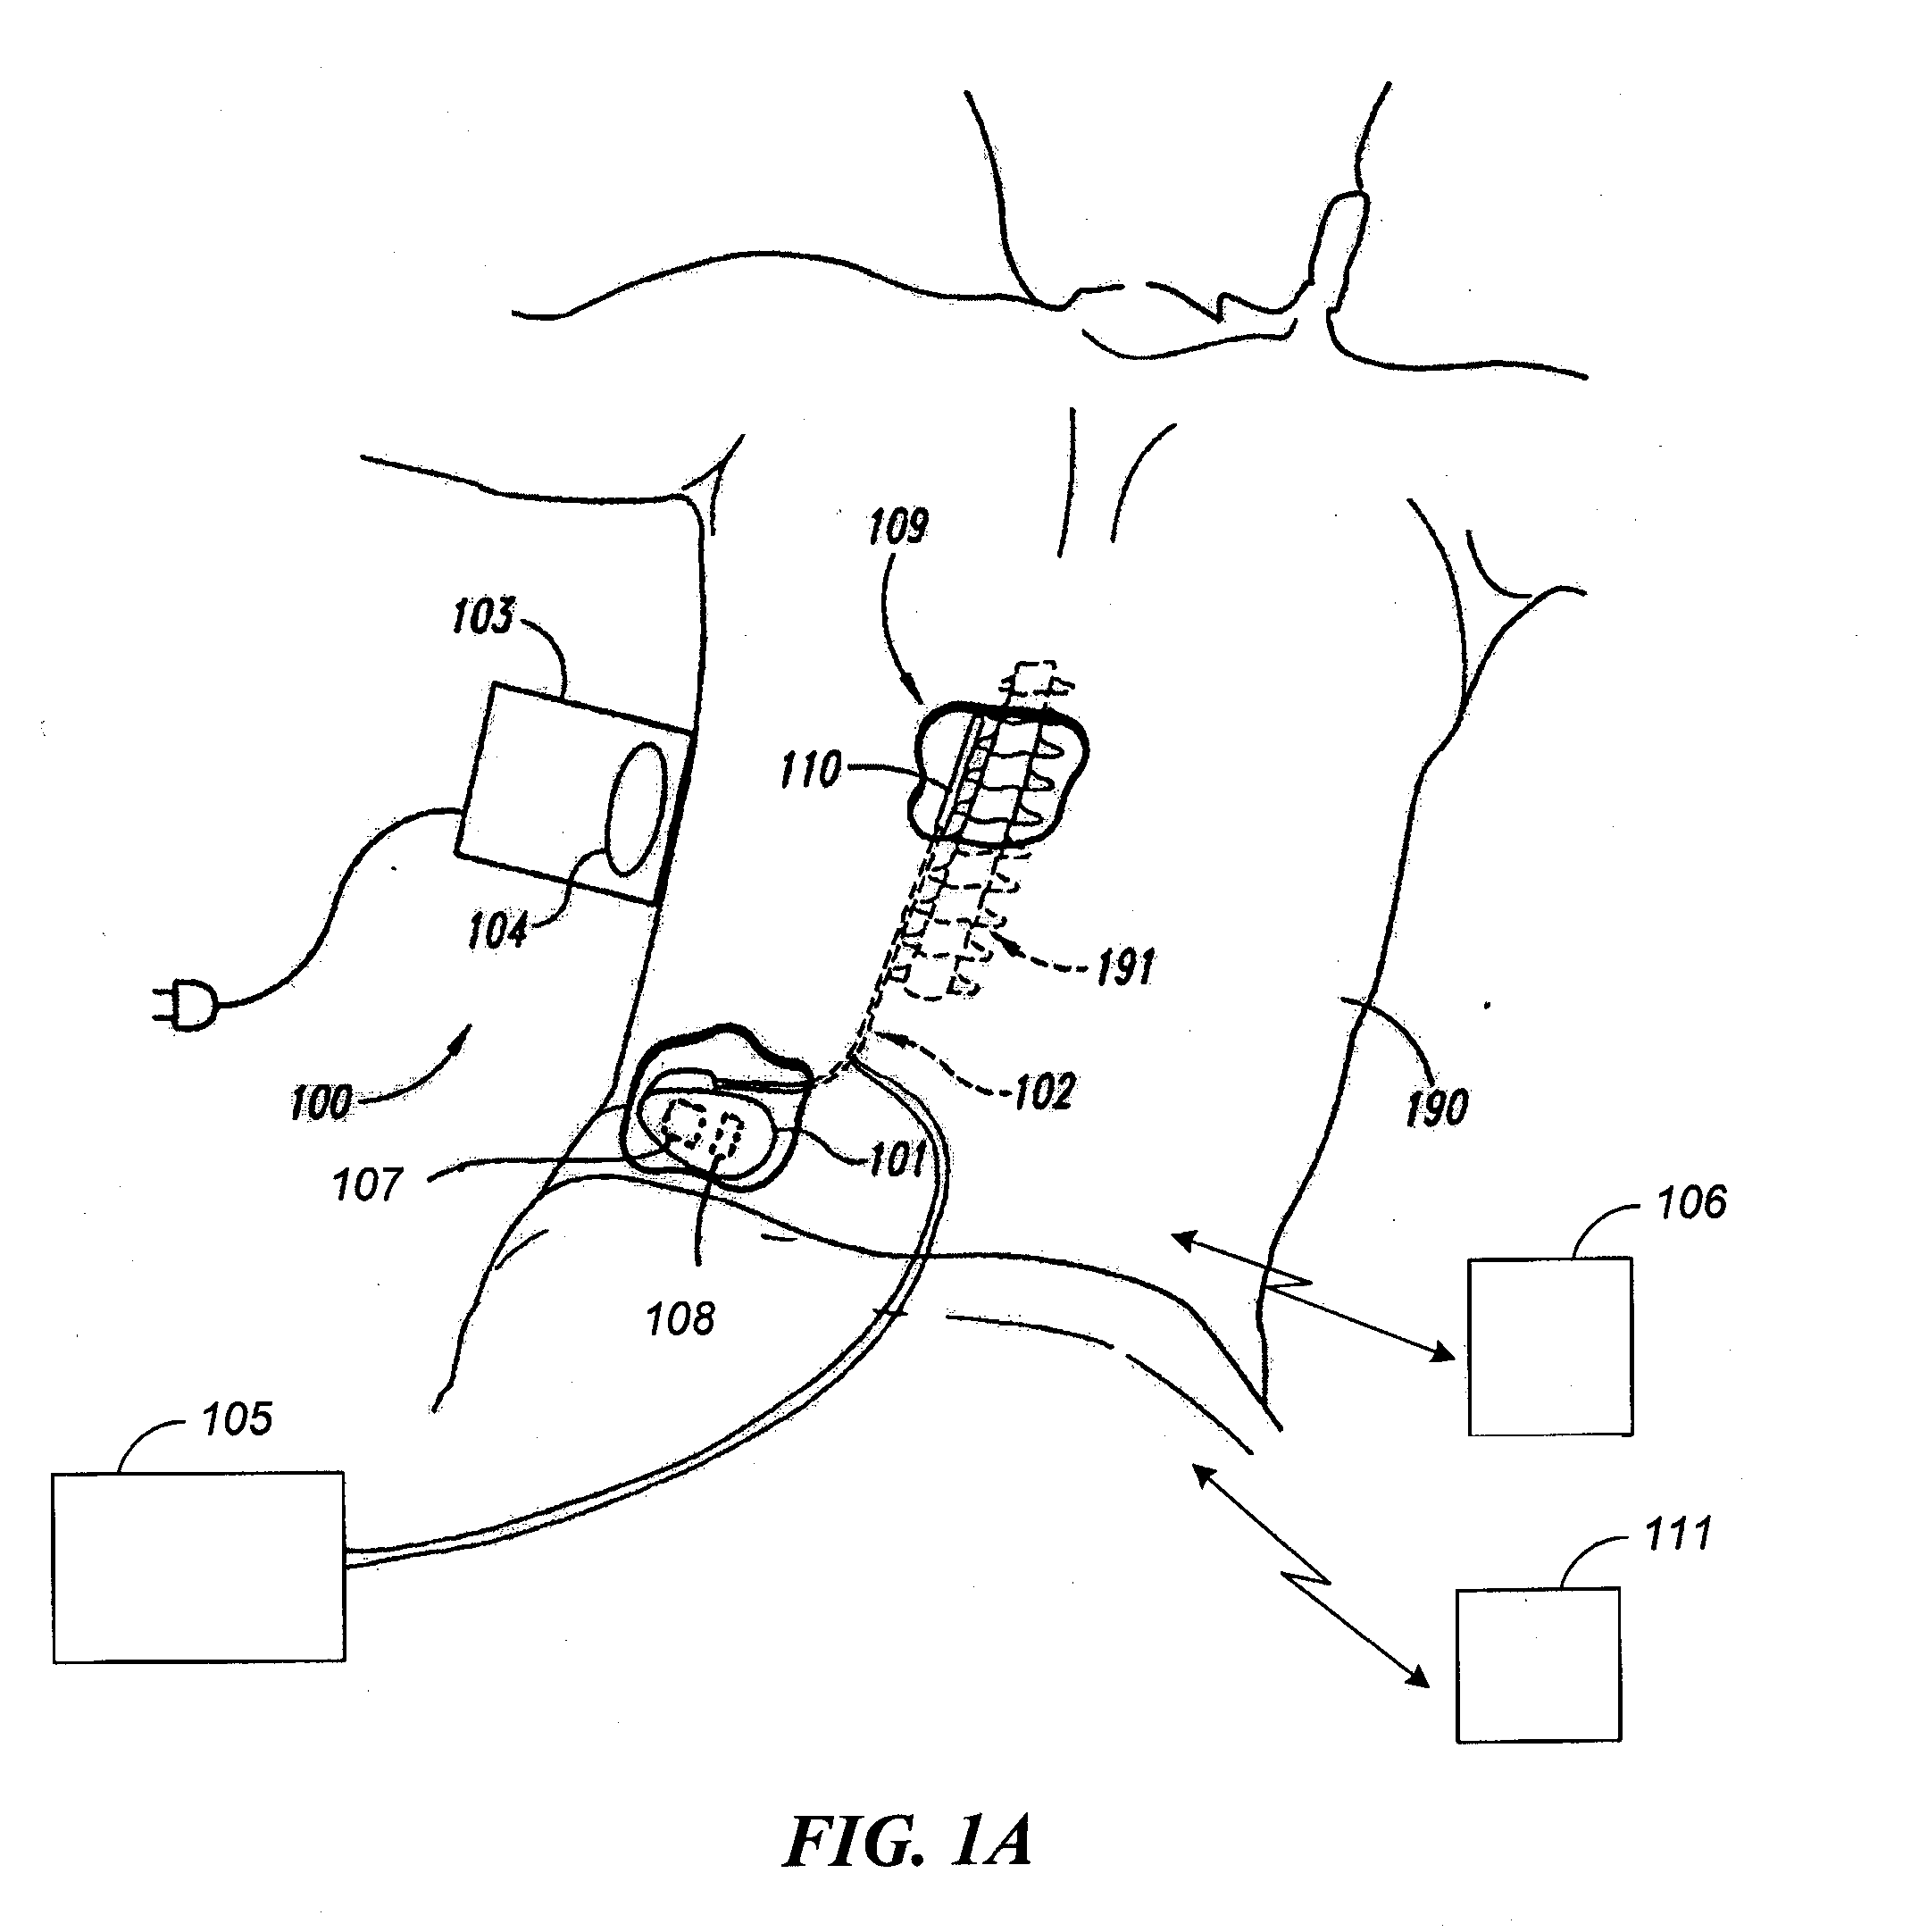 Systems and methods for adjusting electrical therapy based on impedance changes